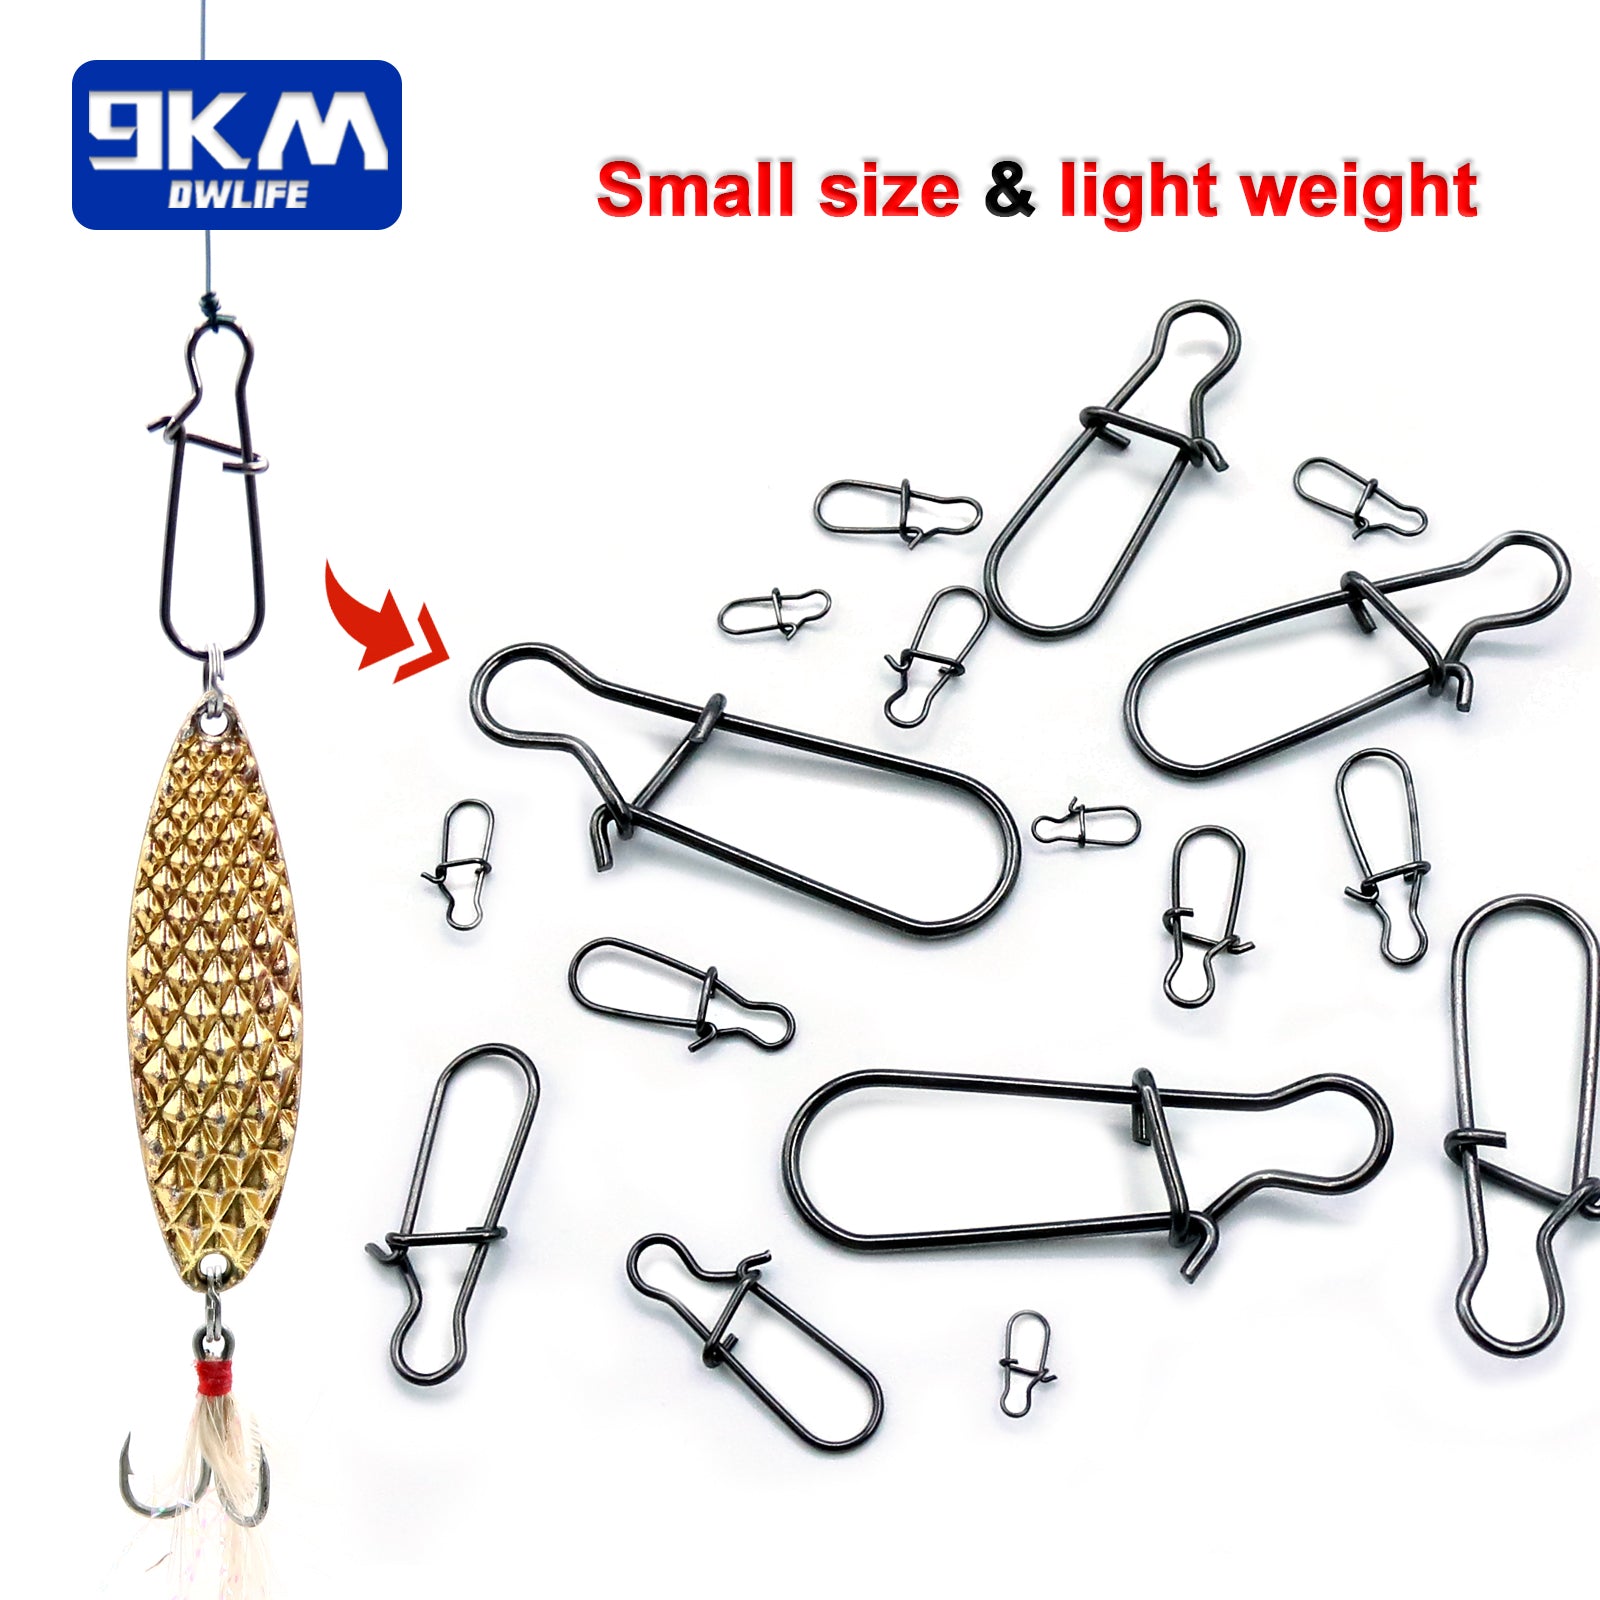 Wholesale SUPERFINDINGS 270Pcs 9 Styles 304 Stainless Steel Fly Fishing  Snap Hooks Fast Change Fly Hook Lure Snaps Combo Hook Snaps for Flies Jigs  Lures 